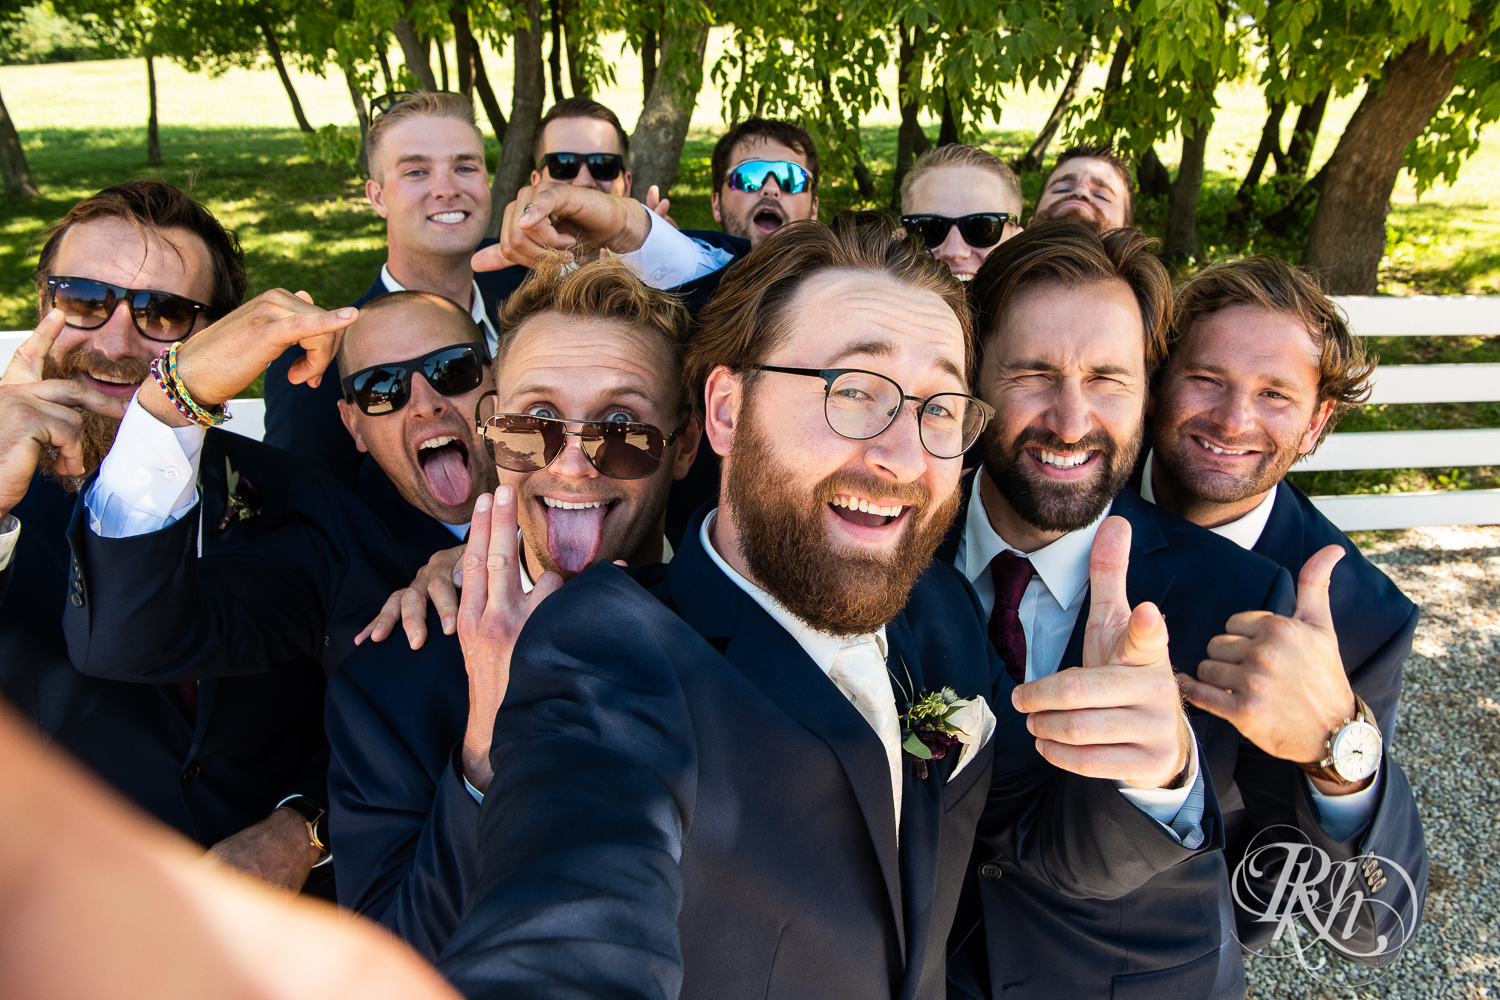 Wedding party in blue suits laugh and smile at Green Acres Event Center in Eden Prairie, Minnesota.